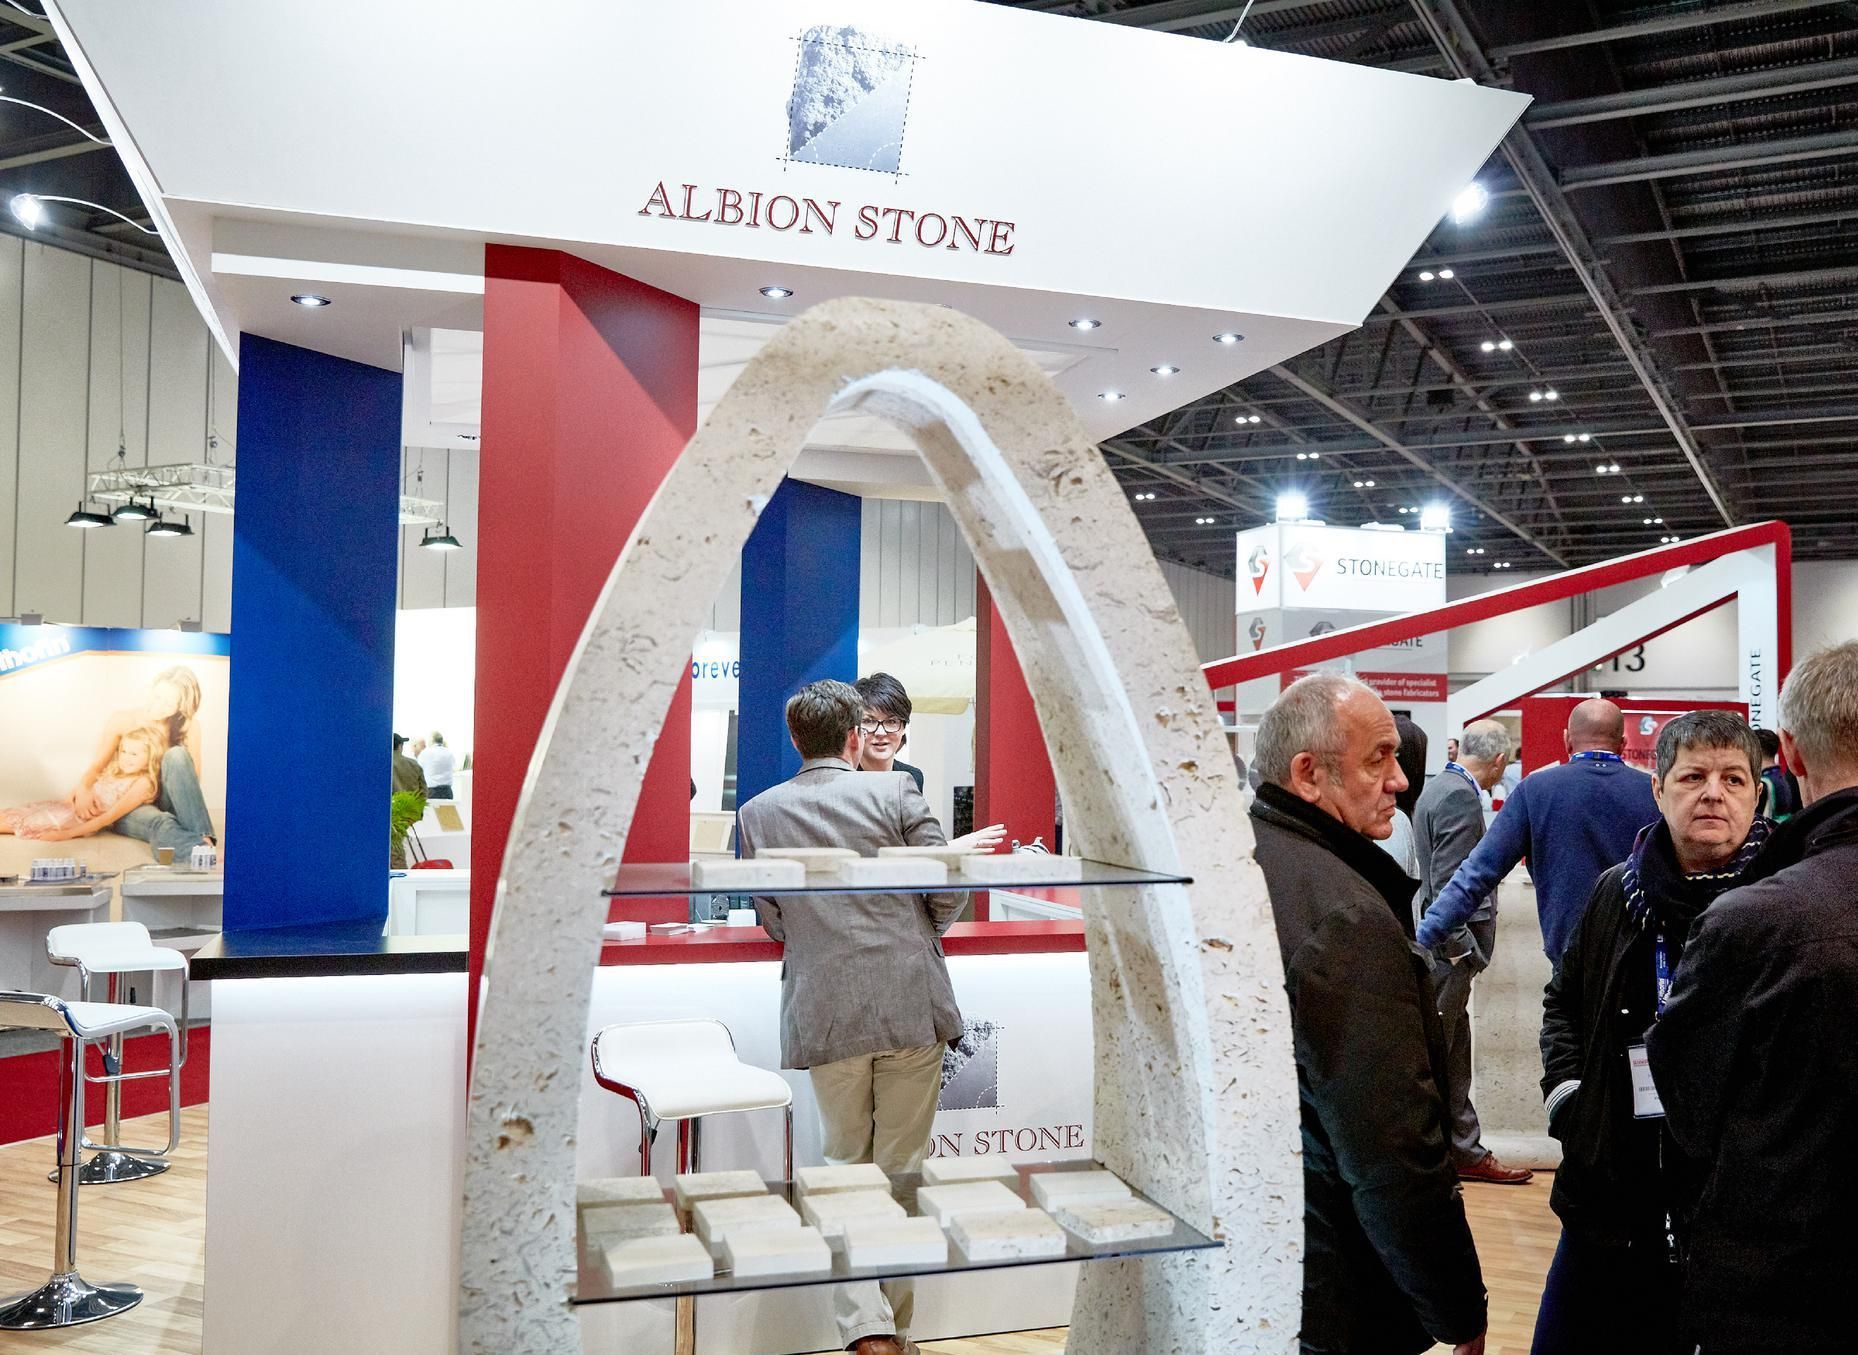 Albion Stone's stand at the last Natural Stone Show